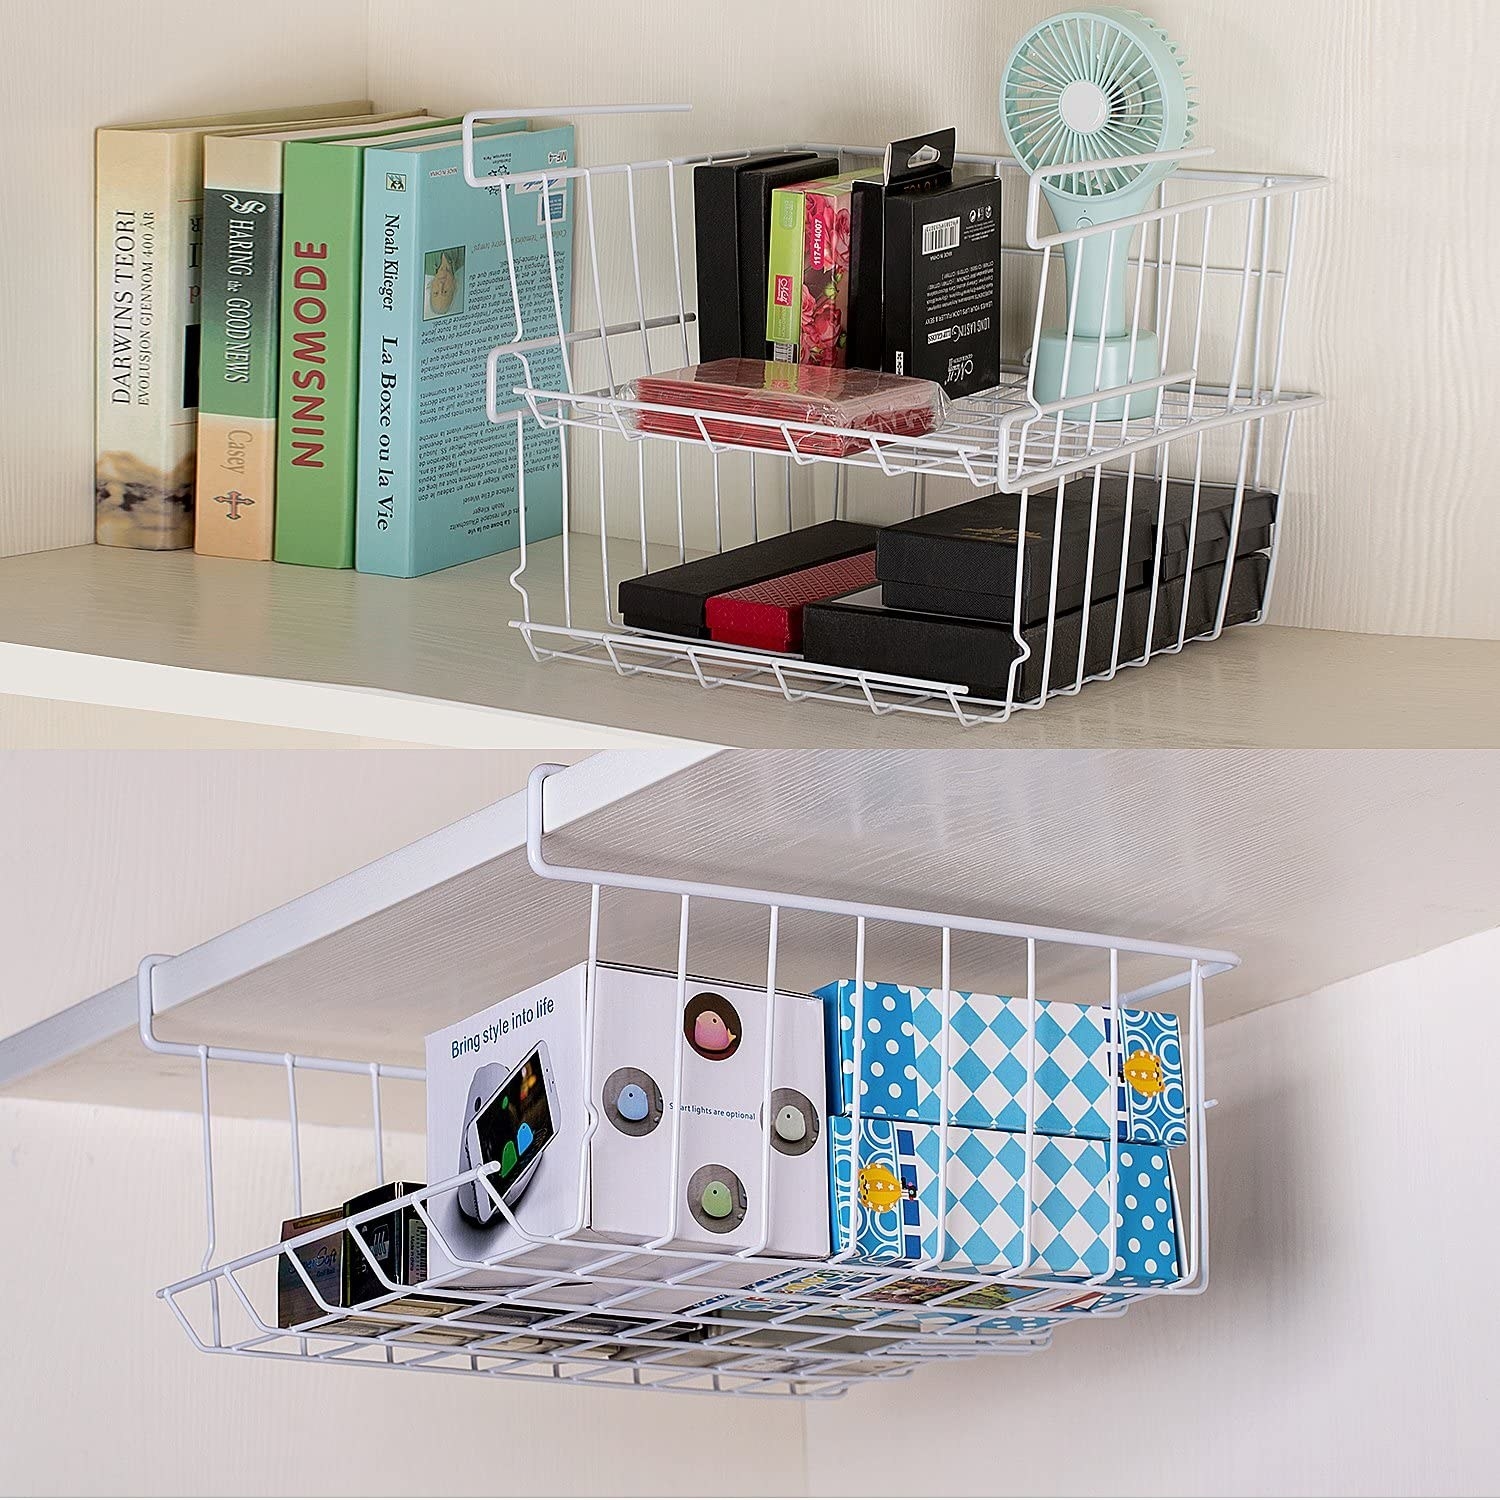 The shelves installed in closets holding small items and tech accessories